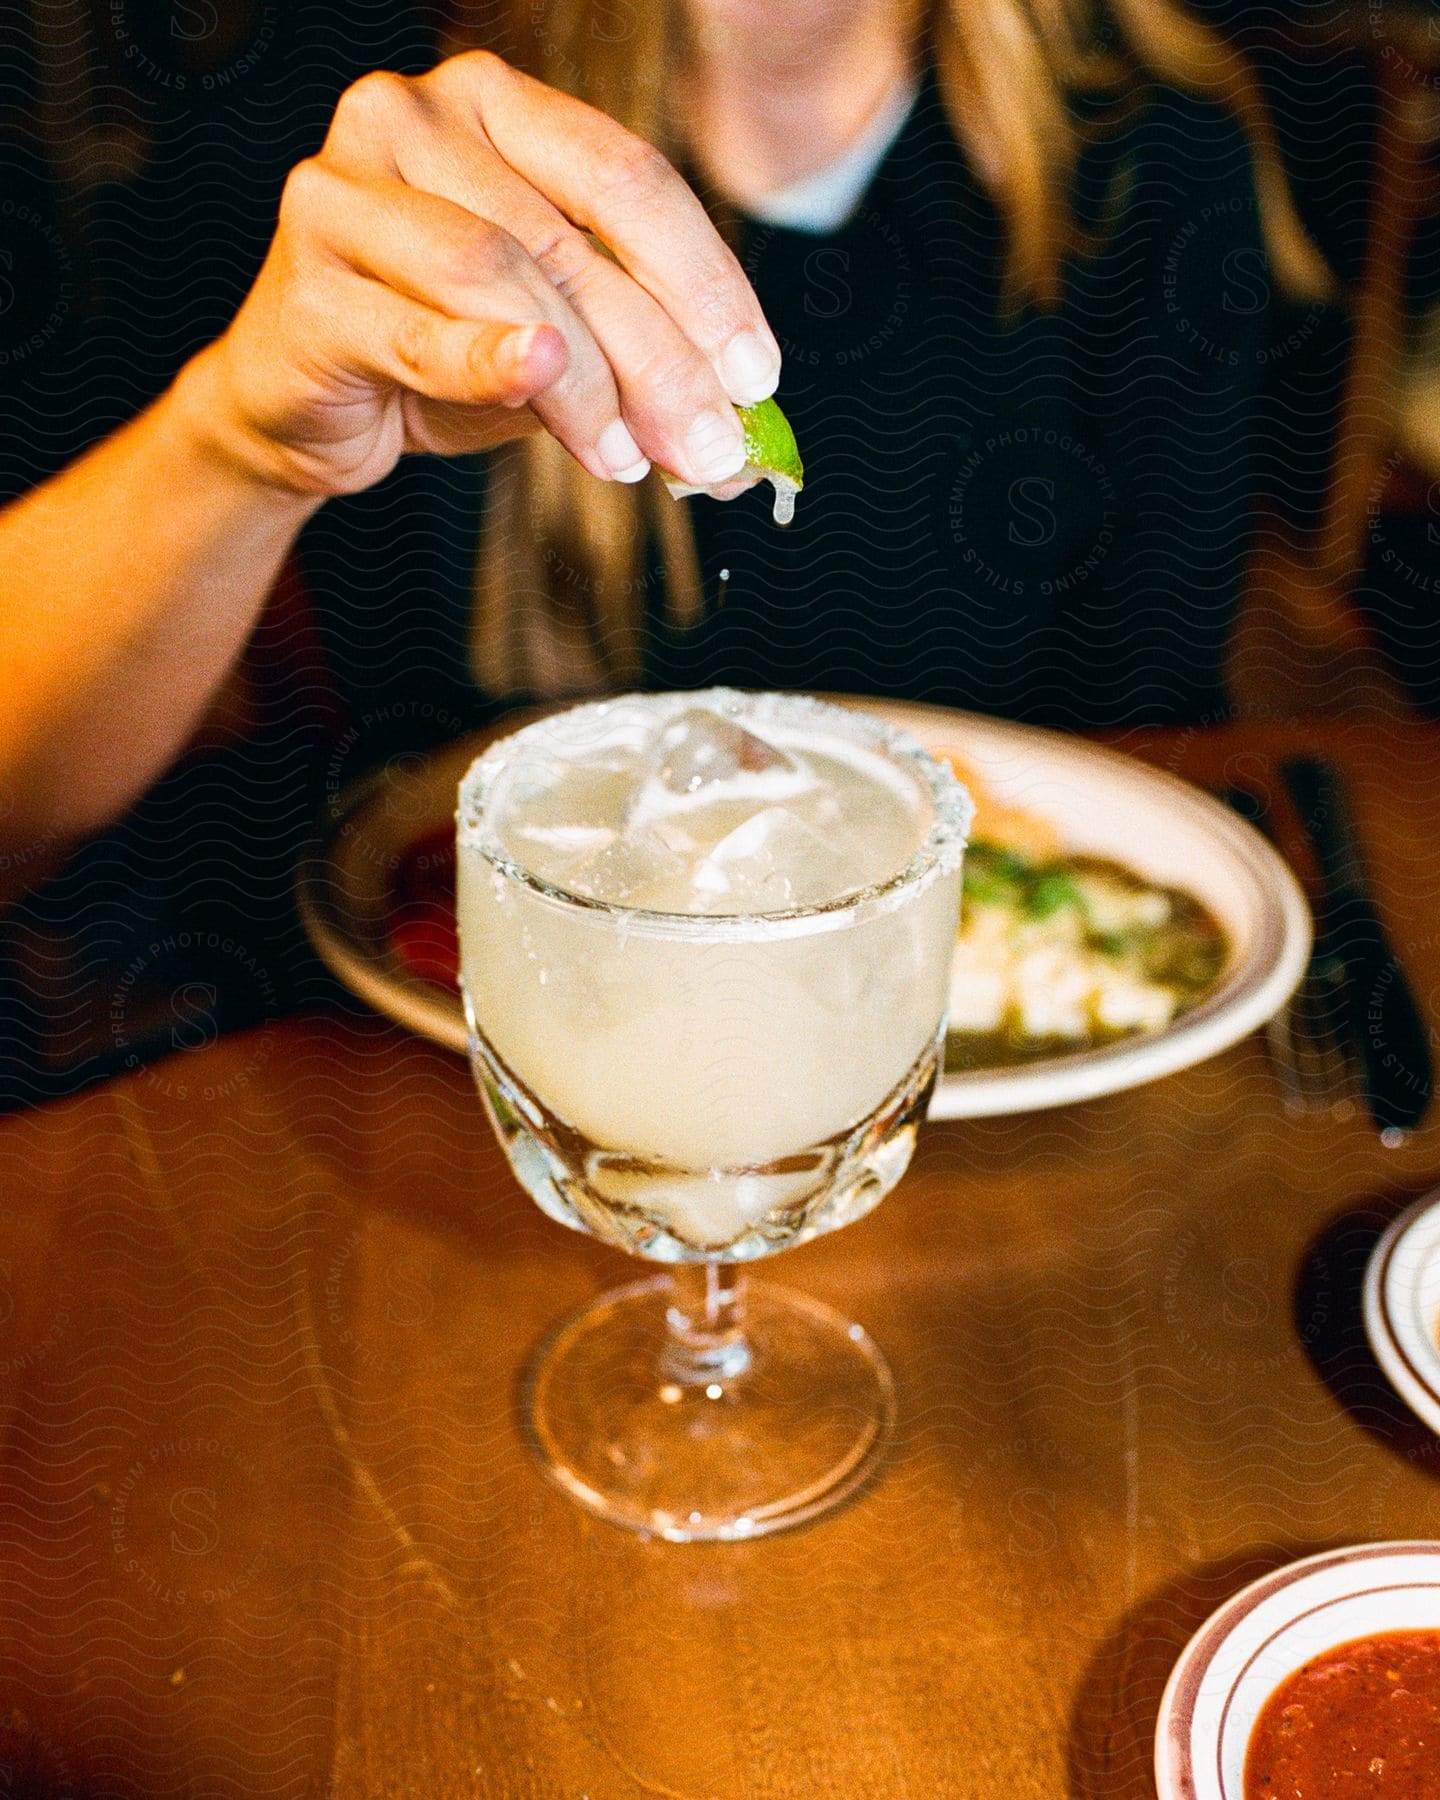 A woman squeezes lime into her drink as she sits at a table with her meal